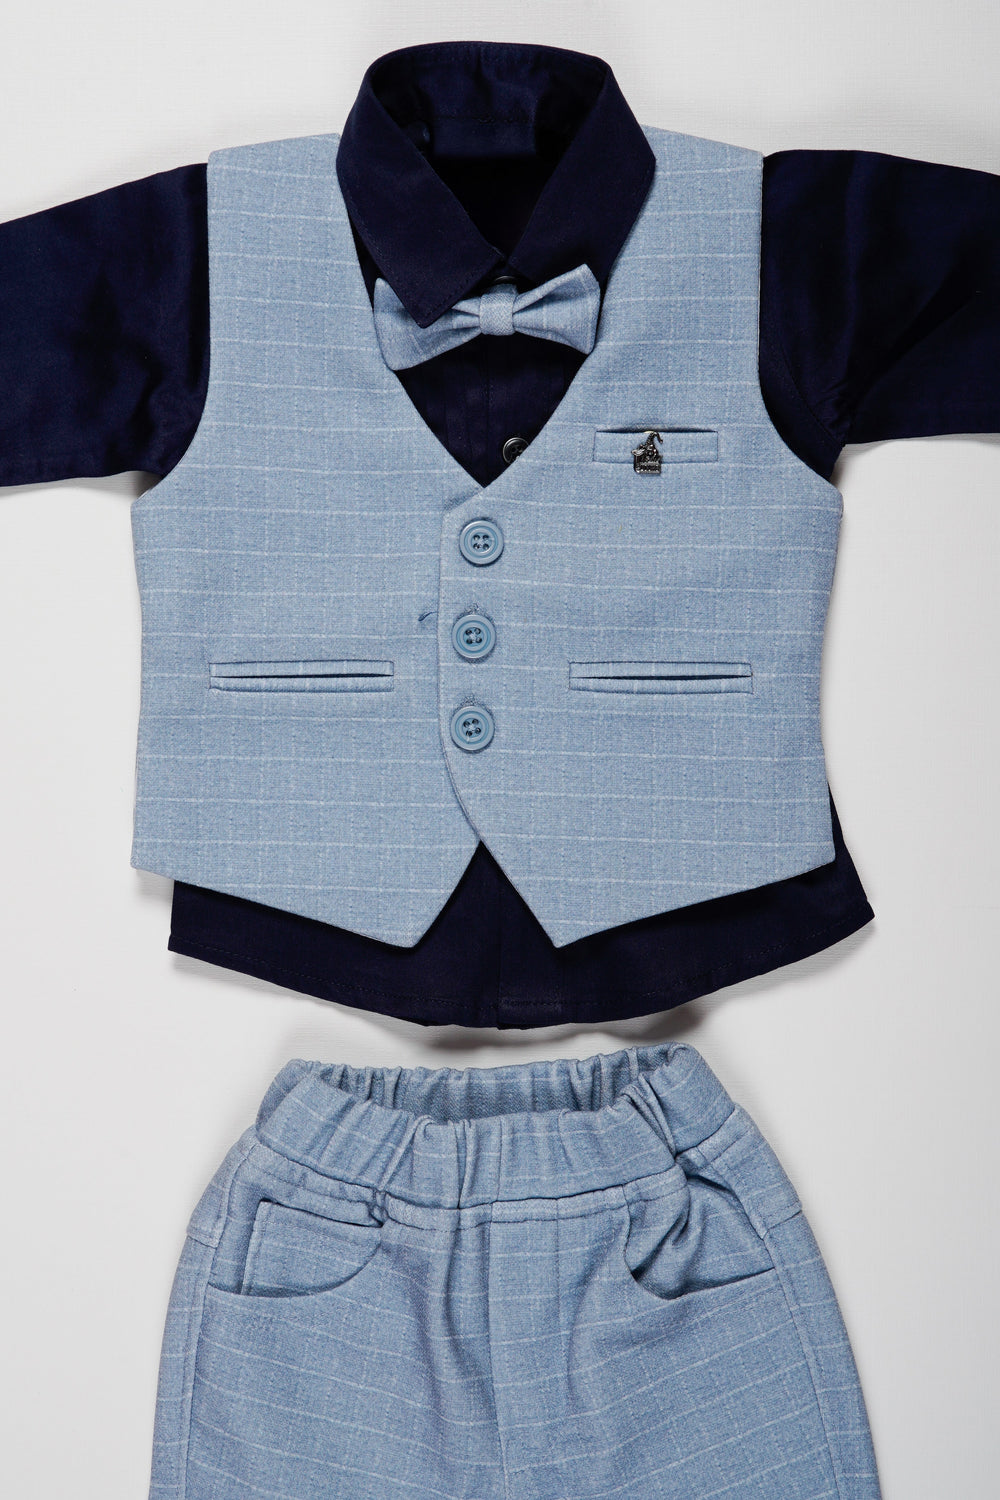 The Nesavu Boys Casual Set Boys Dapper Light Grey Suit Set with Navy Accents and Bow Tie Nesavu Boys Formal Light Grey and Navy Suit Set | Stylish Wedding Attire for Young Boys | The Nesavu